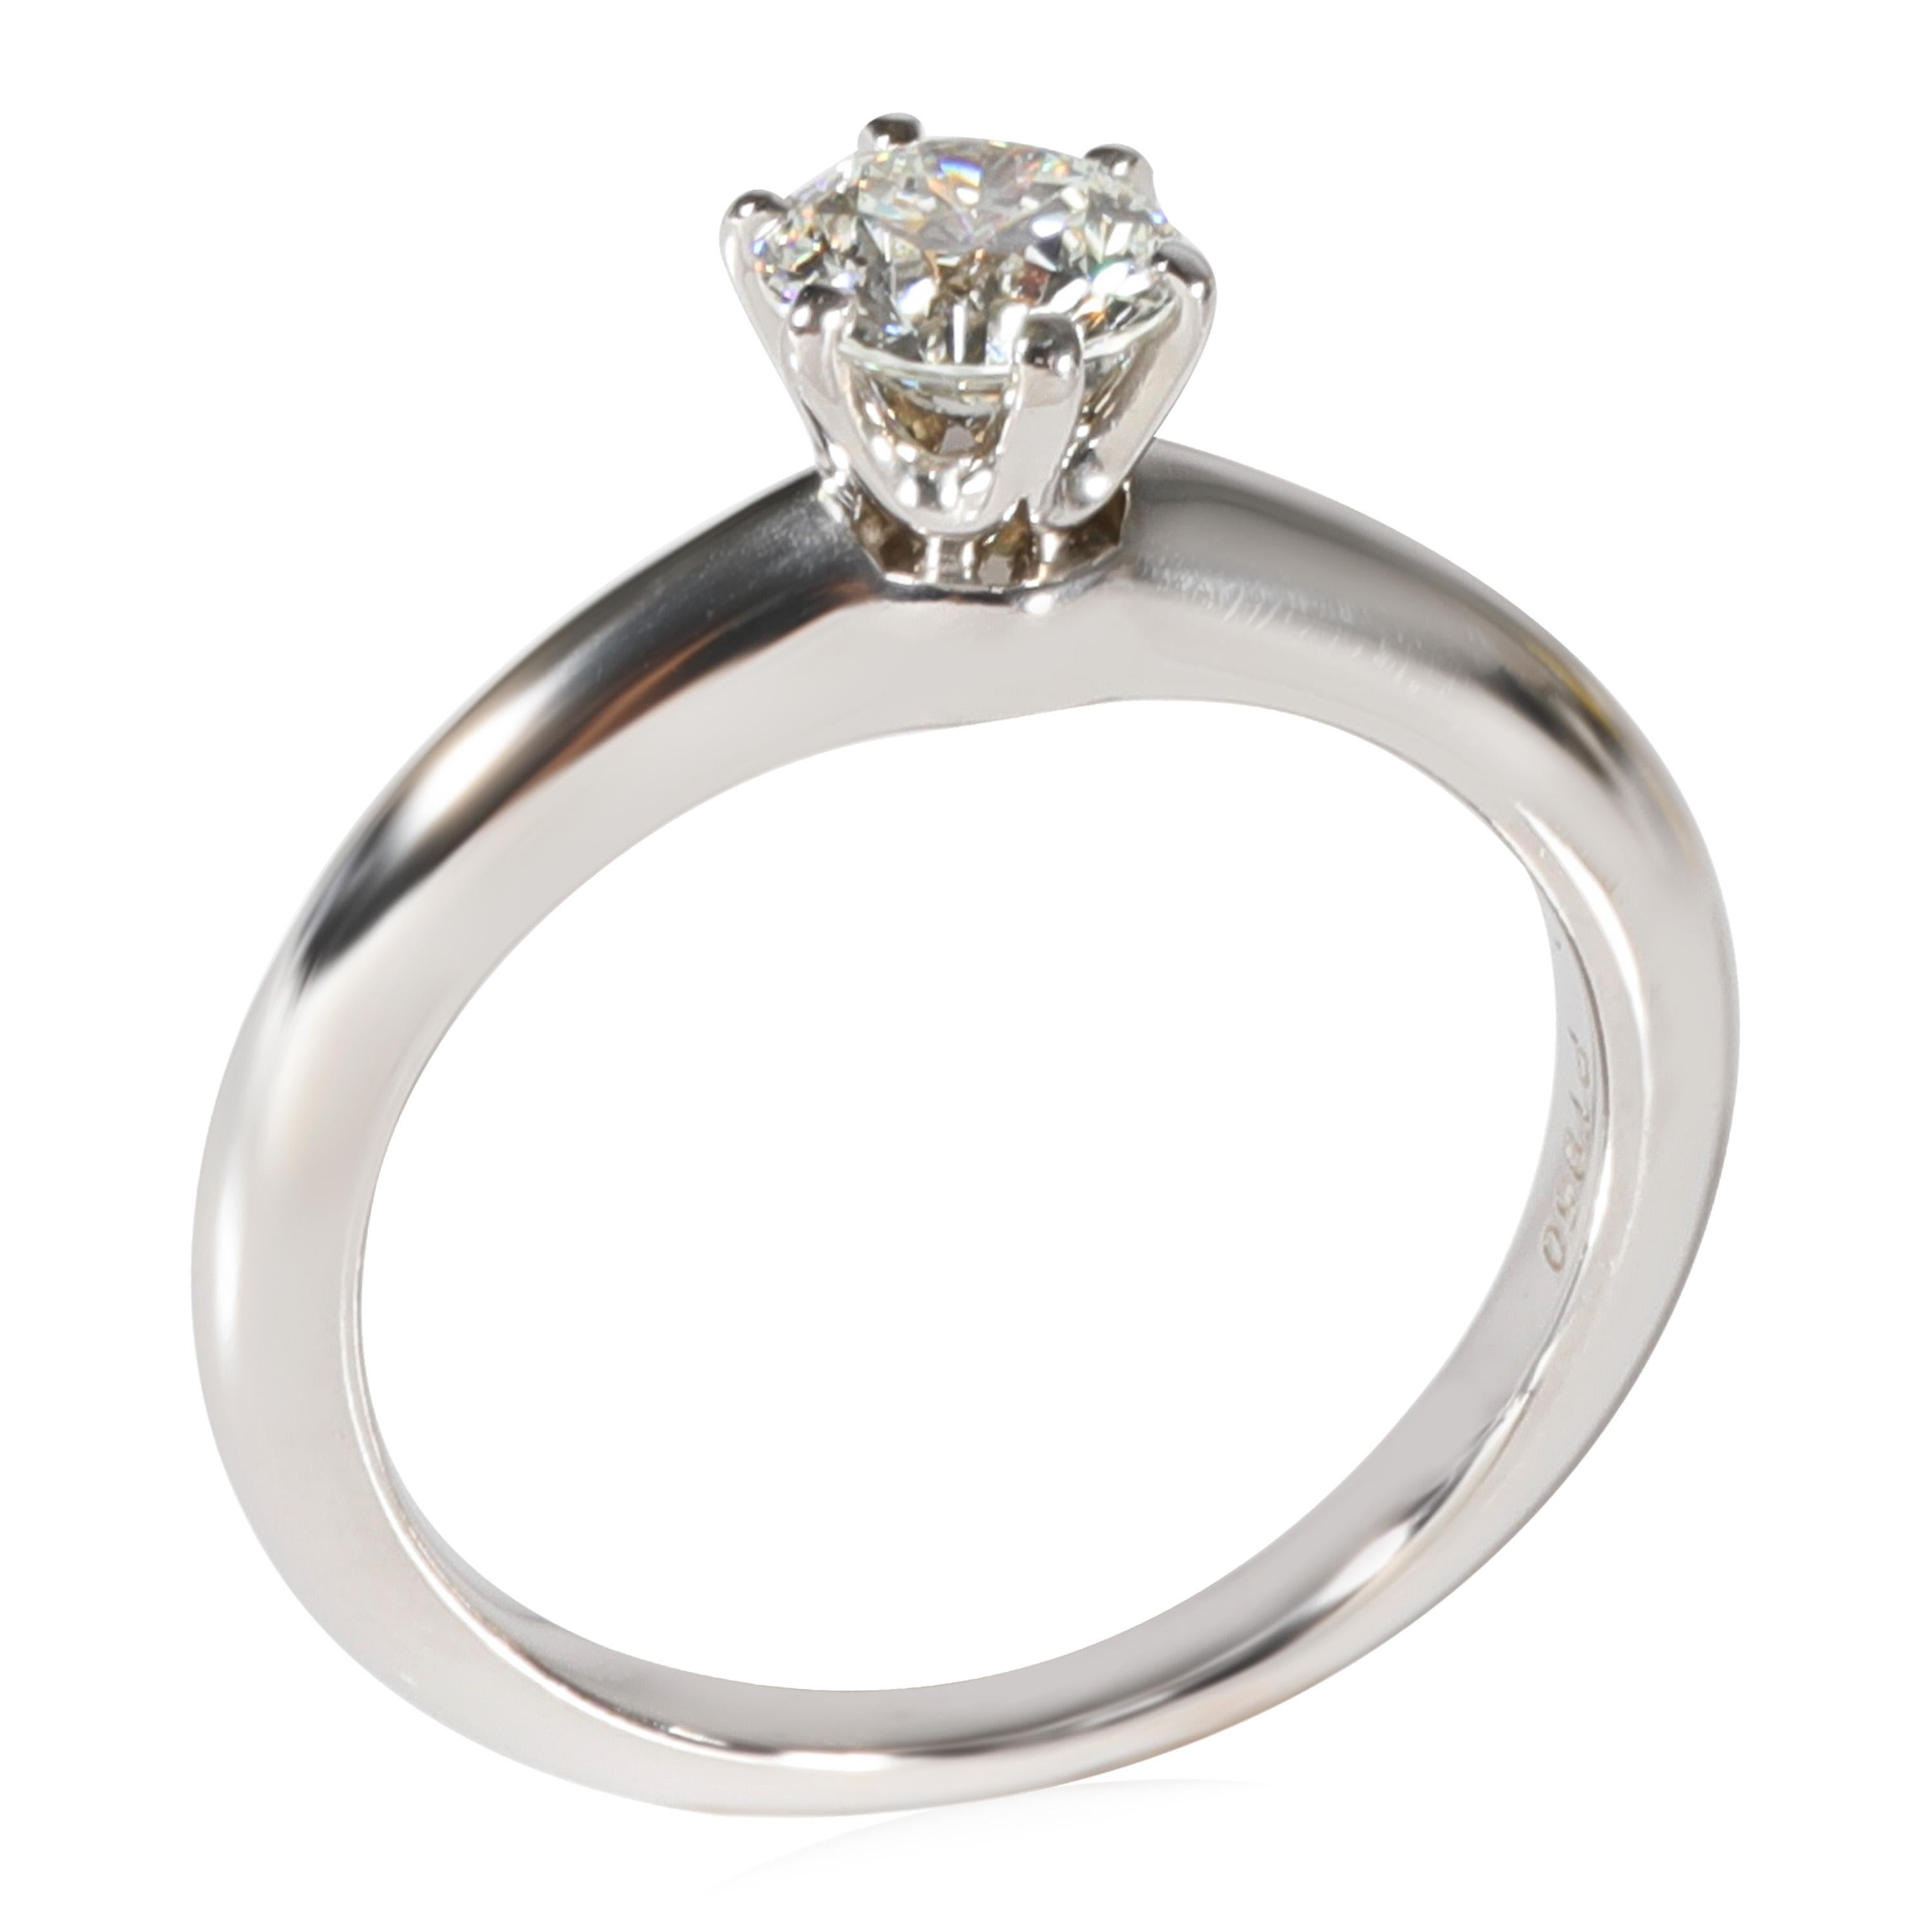 Round Cut Tiffany & Co. Diamond Solitaire Engagement Ring in Platinum G VVS2 0.50 Carat